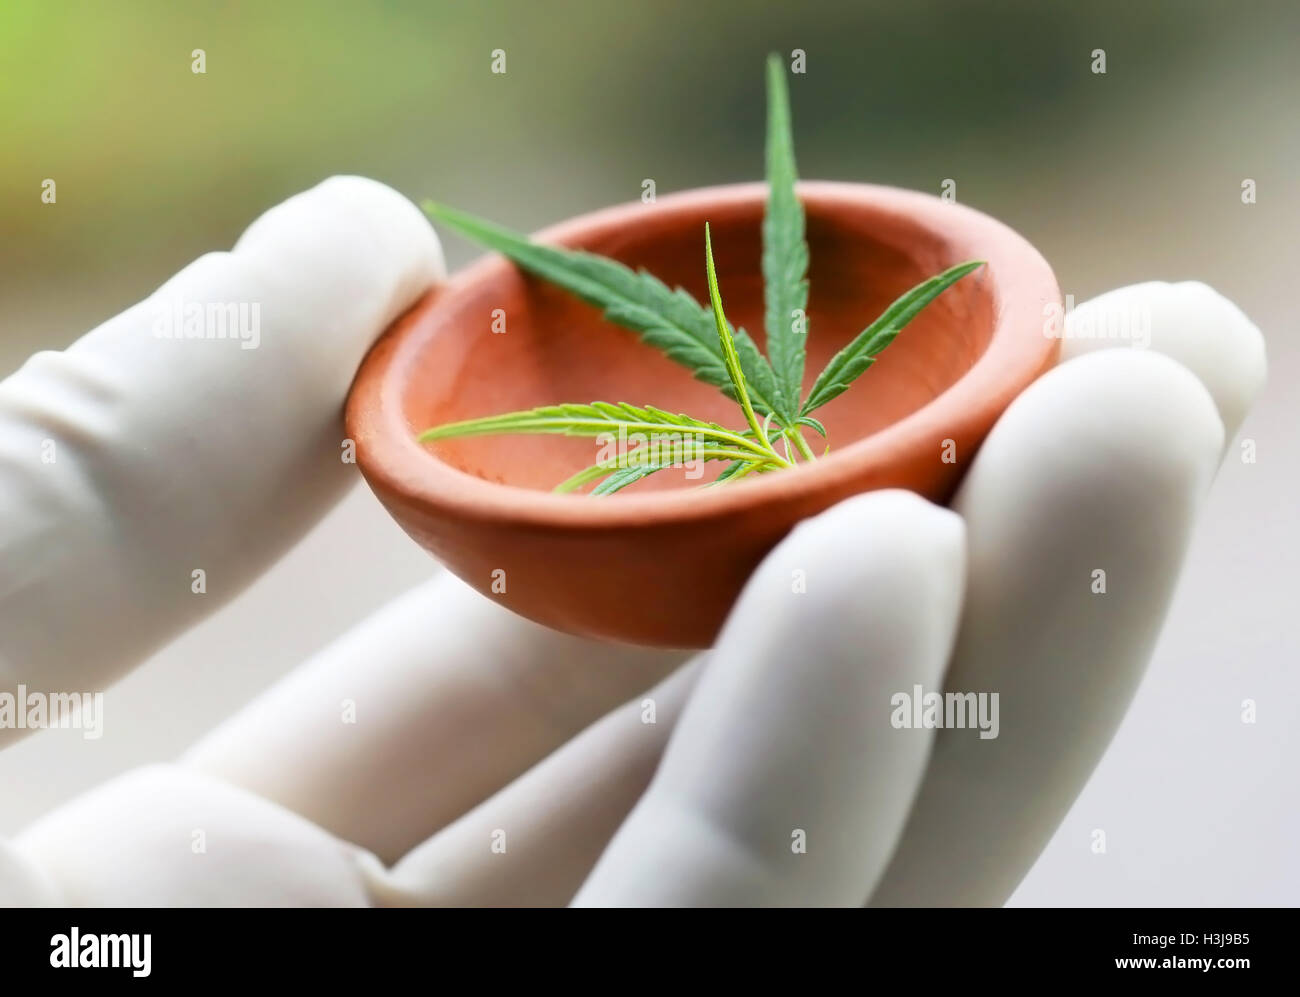 Cannabis or marijuana leaves holding by hand in a pottery wearing protecting glove Stock Photo